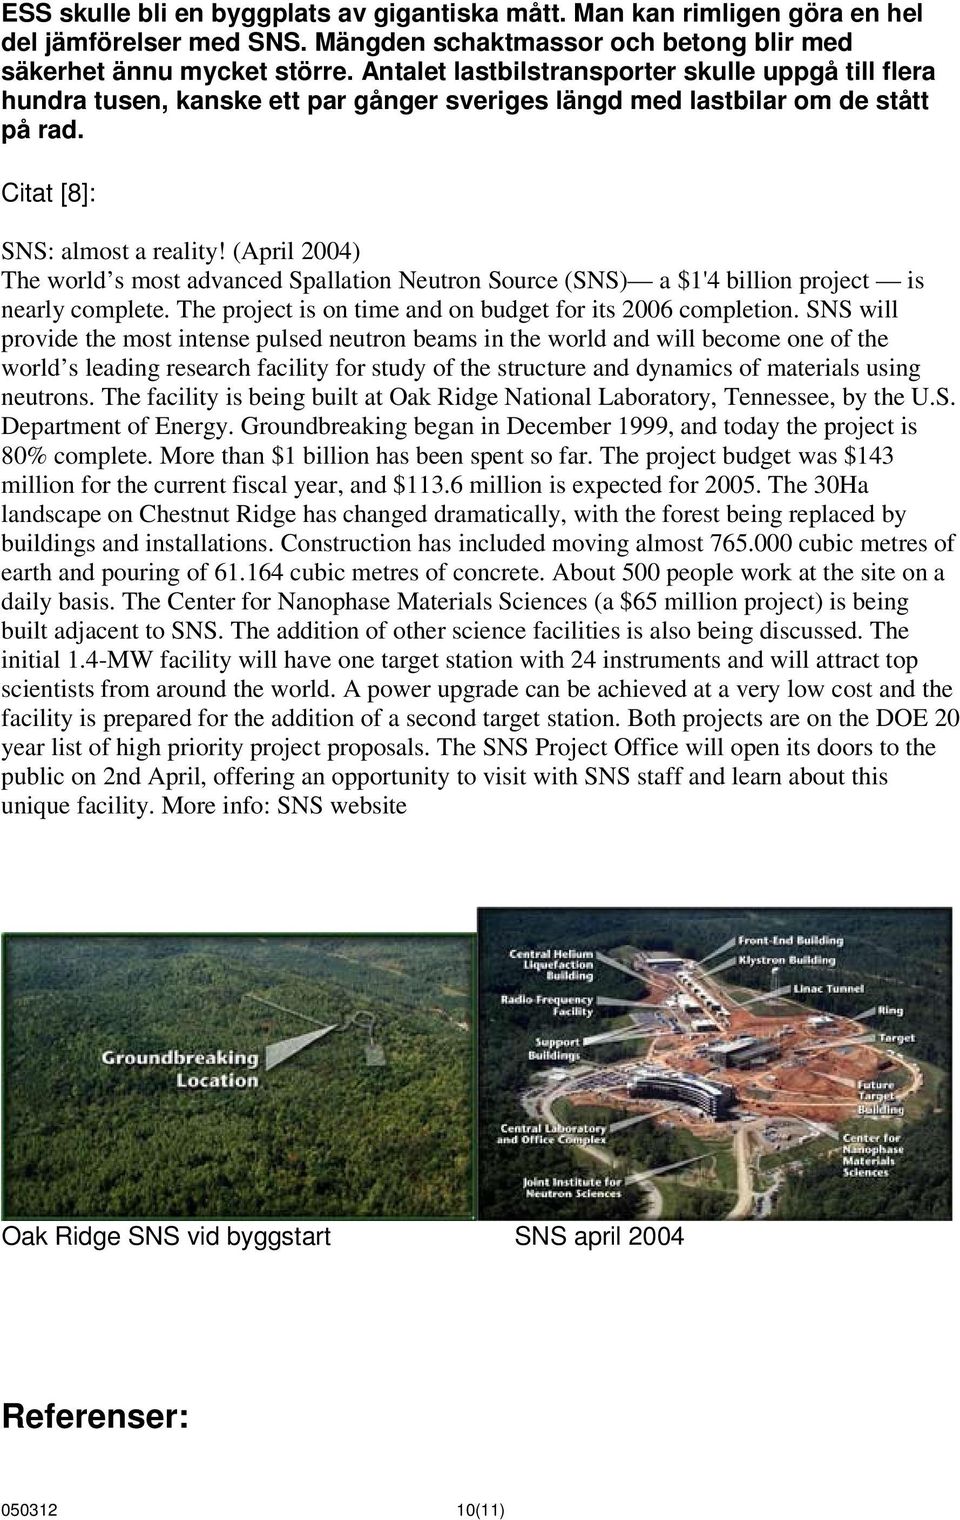 (April 2004) The world s most advanced Spallation Neutron Source (SNS) a $1'4 billion project is nearly complete. The project is on time and on budget for its 2006 completion.